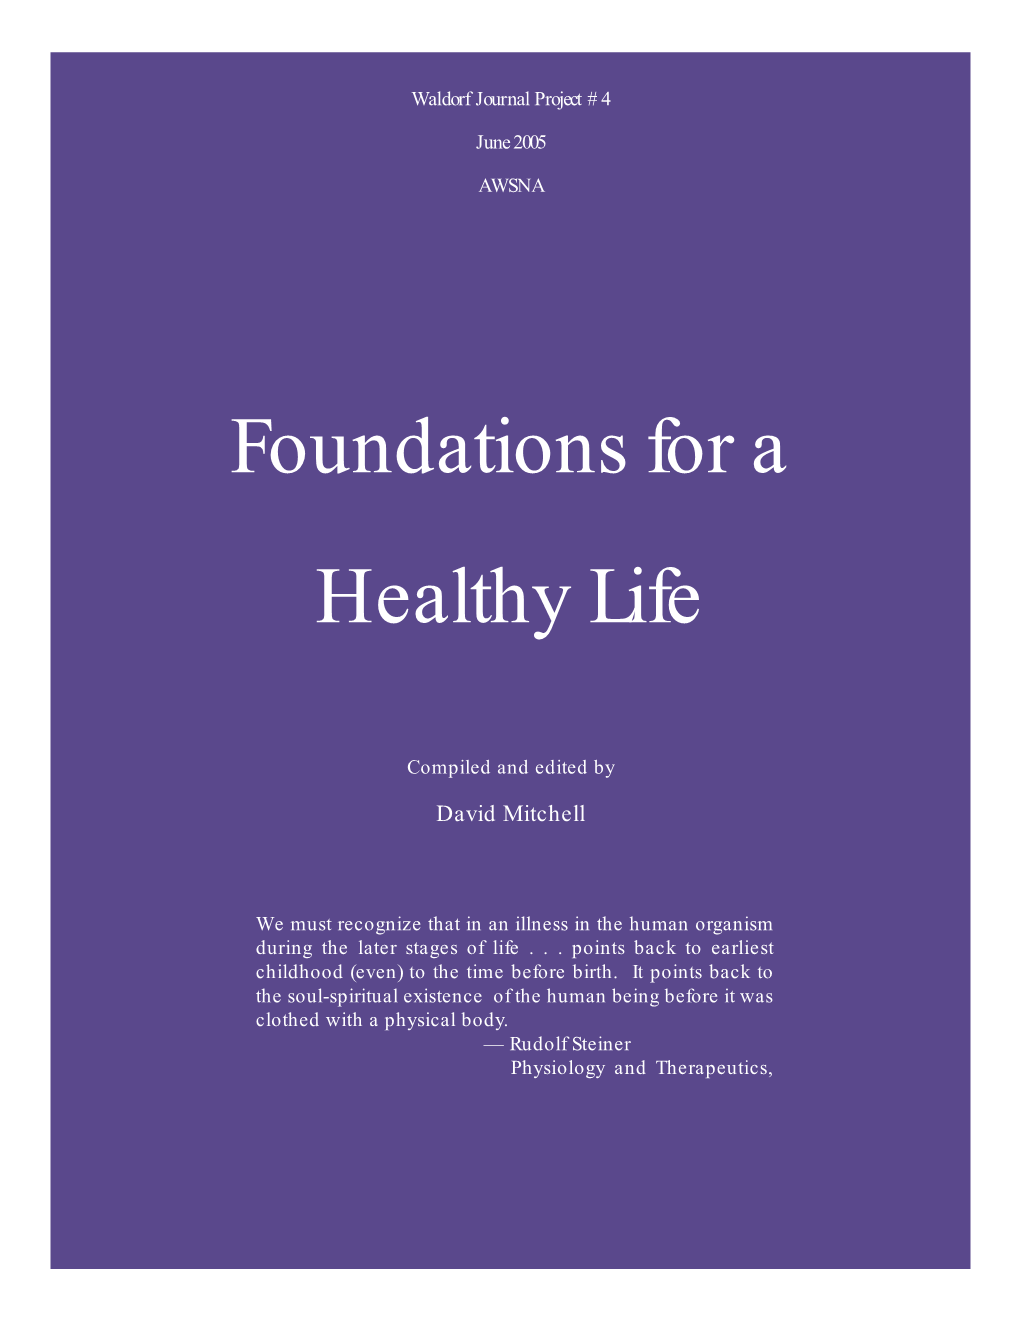 Foundations for a Healthy Life